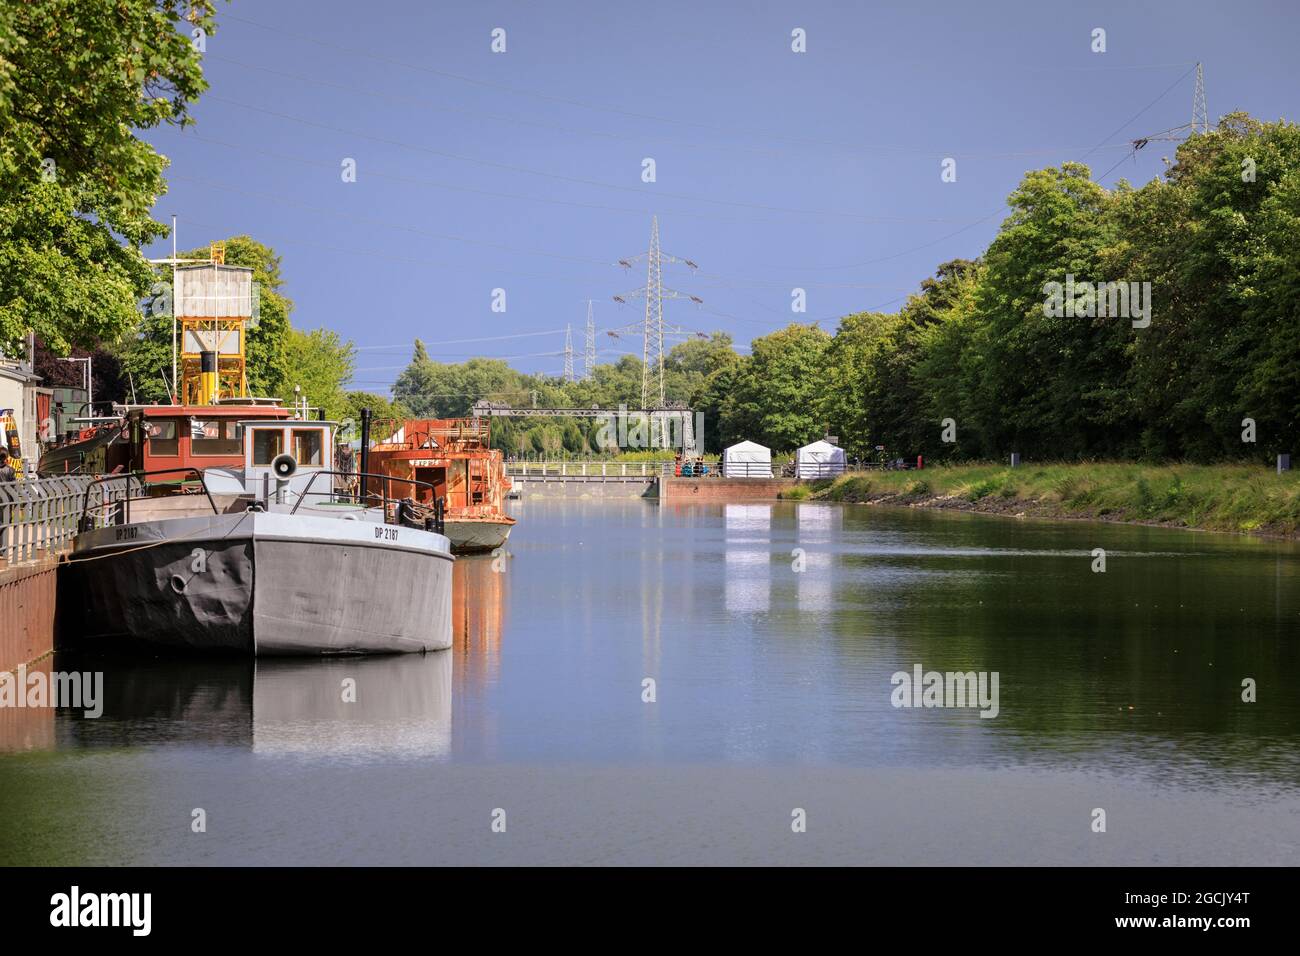 Boats on the Dortmund-Ems Canal at Henrichenburg, Waltrop, NRW, Germany Stock Photo